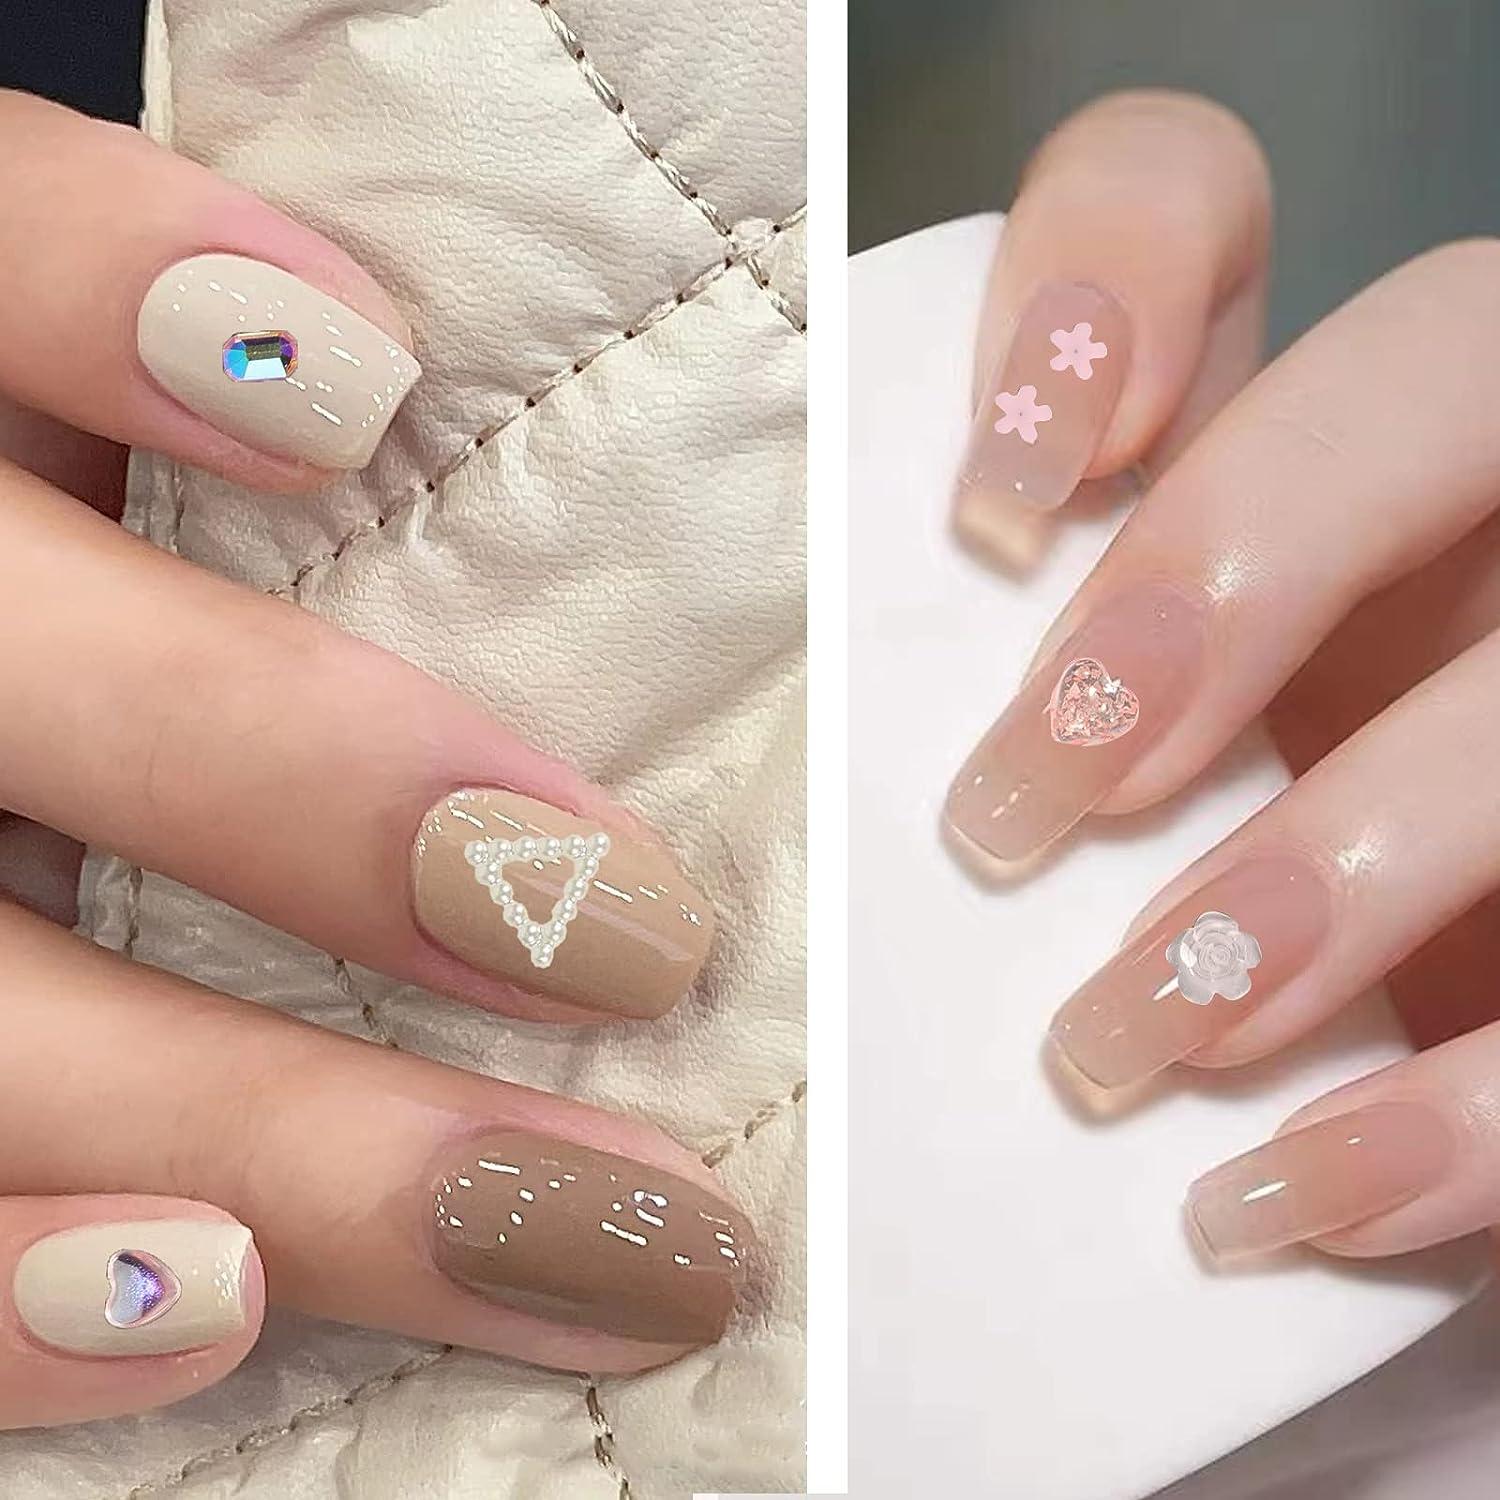 How to apply pearls & beads on your nails 